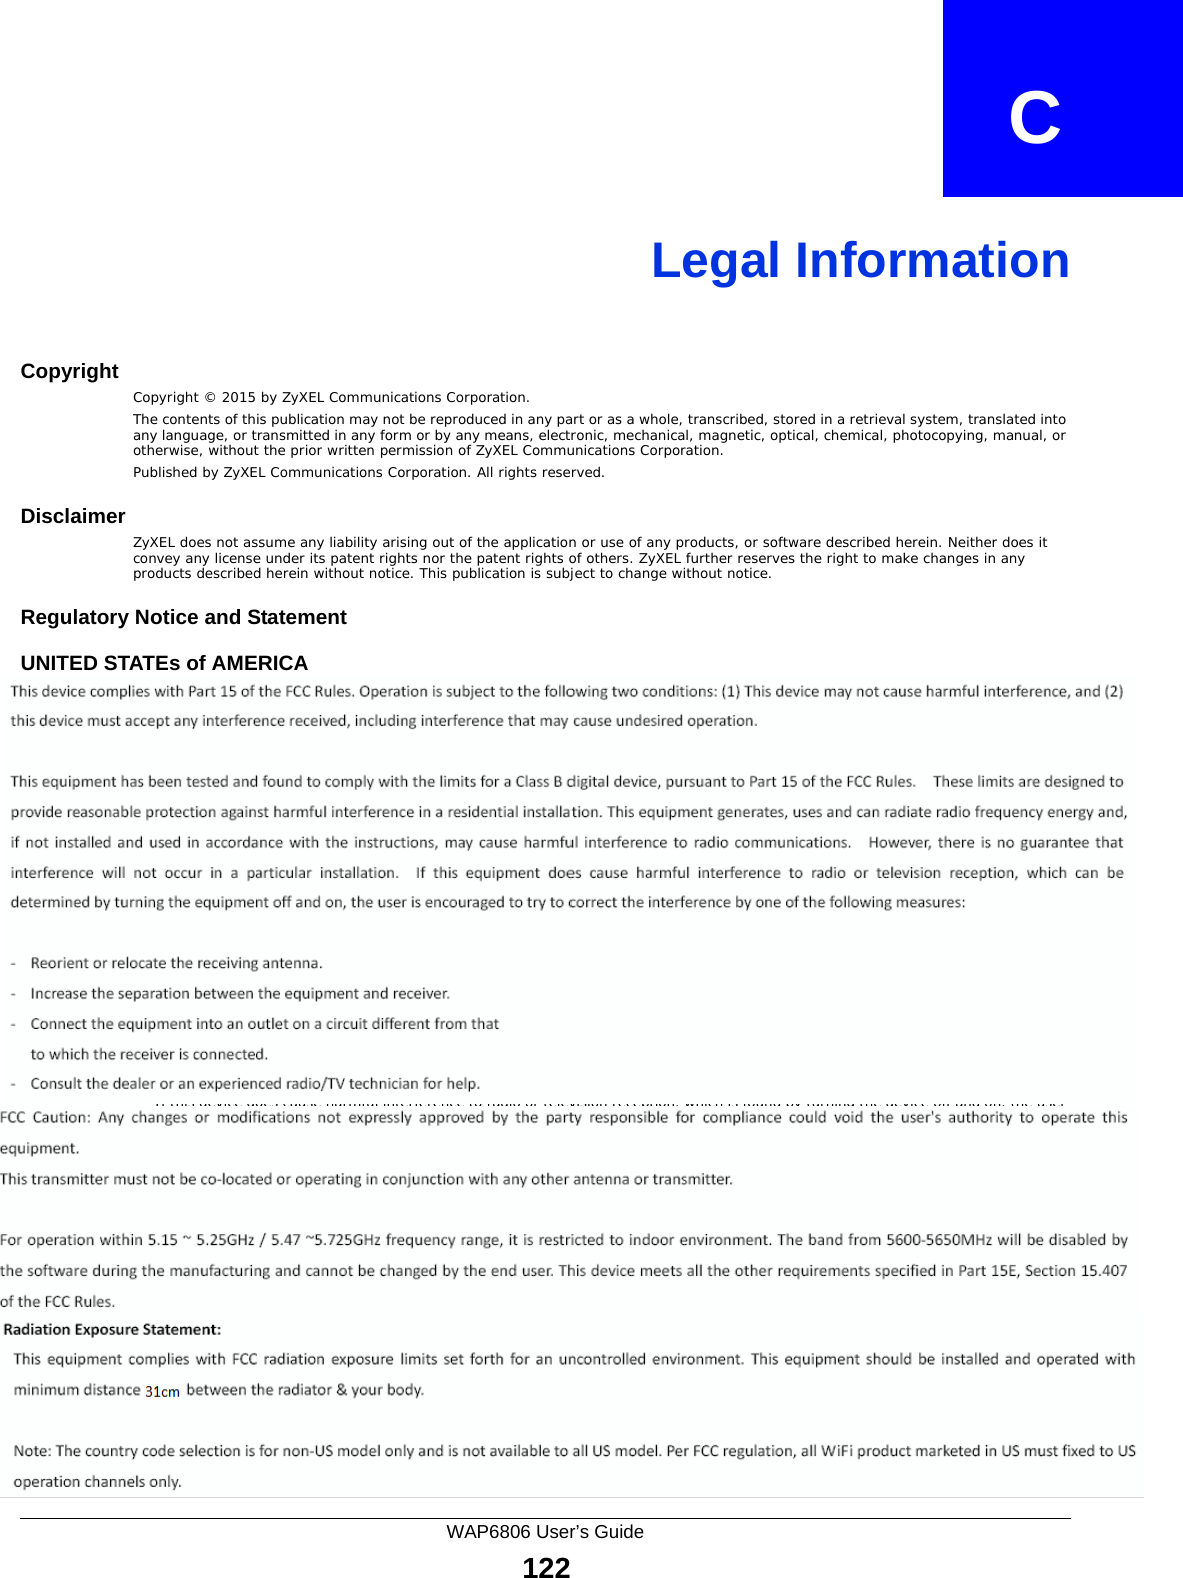 WAP6806 User’s Guide122APPENDIX   CLegal InformationCopyrightCopyright © 2015 by ZyXEL Communications Corporation.The contents of this publication may not be reproduced in any part or as a whole, transcribed, stored in a retrieval system, translated into any language, or transmitted in any form or by any means, electronic, mechanical, magnetic, optical, chemical, photocopying, manual, or otherwise, without the prior written permission of ZyXEL Communications Corporation.Published by ZyXEL Communications Corporation. All rights reserved.DisclaimerZyXEL does not assume any liability arising out of the application or use of any products, or software described herein. Neither does it convey any license under its patent rights nor the patent rights of others. ZyXEL further reserves the right to make changes in any products described herein without notice. This publication is subject to change without notice.Regulatory Notice and StatementUNITED STATEs of AMERICAThe following information applies if you use the product within USA area.FCC EMC Statement • This device complies with part 15 of the FCC Rules. Operation is subject to the following two conditions:1This device may not cause harmful interference, and 2This device must accept any interference received, including interference that may cause undesired operation.• Changes or modifications not expressly approved by the party responsible for compliance could void the user&apos;s authority to operate the device.• This product has been tested and complies with the specifications for a Class B digital device, pursuant to Part 15 of the FCC Rules. These limits are designed to provide reasonable protection against harmful interference in a residential installation. This device generates, uses, and can radiate radio frequency energy and, if not installed and used according to the instructions, may cause harmful interference to radio communications. However, there is no guarantee that interference will not occur in a particular installation. • If this device does cause harmful interference to radio or television reception, which is found by turning the device off and on, the user is encouraged to try to correct the interference by one or more of the following measures:1Reorient or relocate the receiving antenna.2Increase the separation between the equipment or devices.3Connect the device to an outlet other than the receiver&apos;s.4Consult a dealer or an experienced radio/TV technician for assistance.FCC Radiation Exposure Statement• This device complies with FCC RF radiation exposure limits set forth for an uncontrolled environment. • This transmitter must be at least 20 cm from the user and must not be co-located or operating in conjunction with any other antenna or transmitter.CANADAThe following information applies if you use the product within Canada area.Industry Canada ICES statementCAN ICES-3 (B)/NMB-3(B)